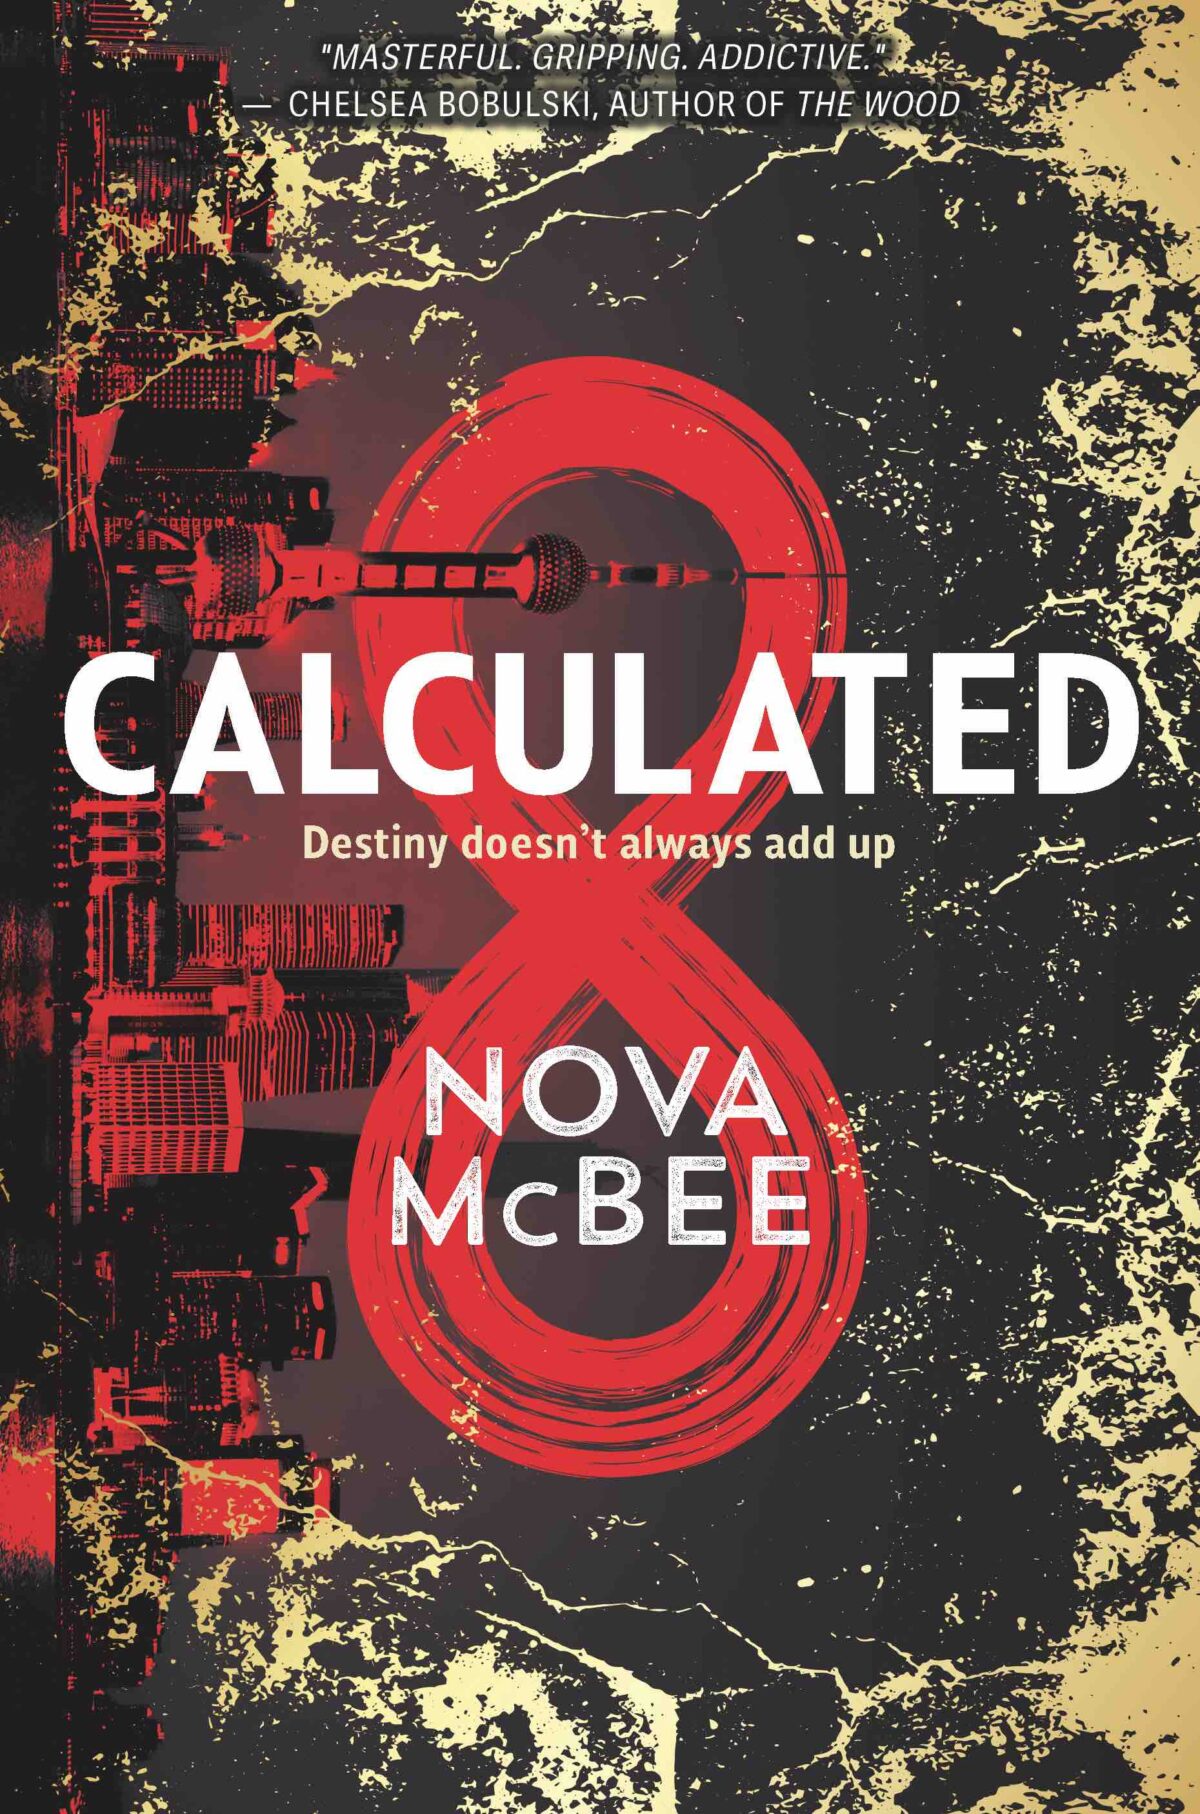 calculated, a clean book for teens and tweens